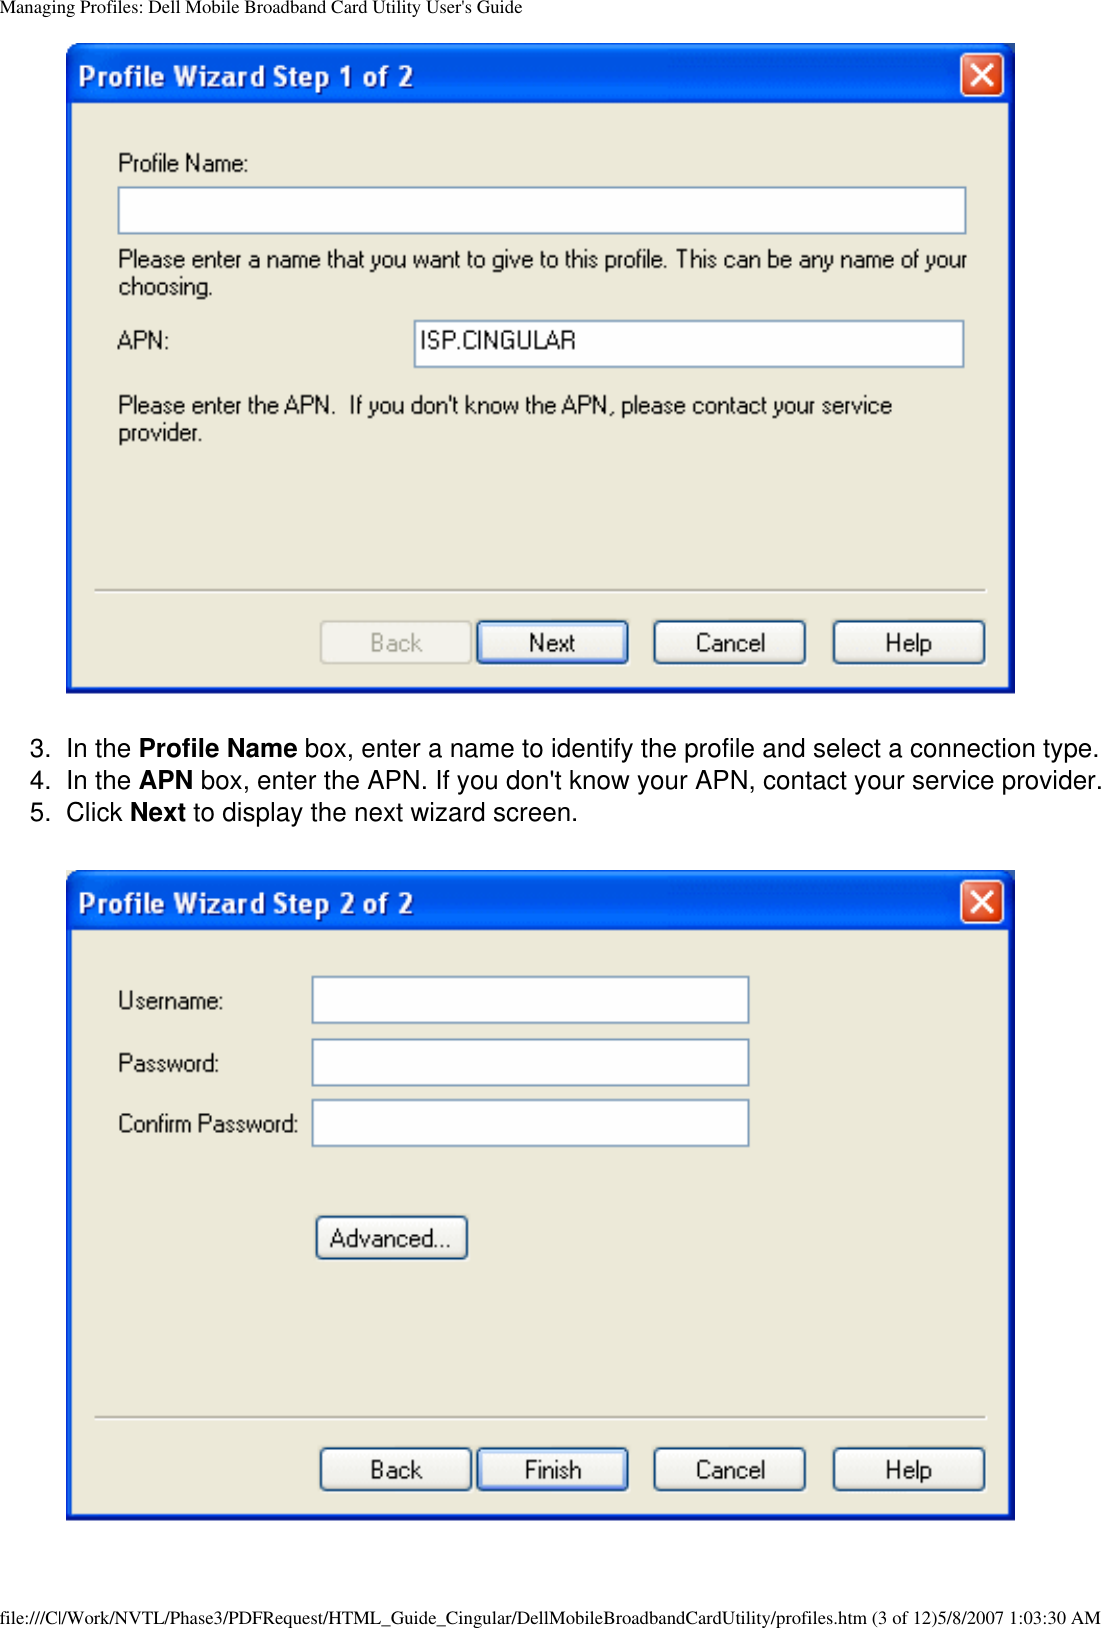 Managing Profiles: Dell Mobile Broadband Card Utility User&apos;s Guide3.  In the Profile Name box, enter a name to identify the profile and select a connection type.4.  In the APN box, enter the APN. If you don&apos;t know your APN, contact your service provider.5.  Click Next to display the next wizard screen.file:///C|/Work/NVTL/Phase3/PDFRequest/HTML_Guide_Cingular/DellMobileBroadbandCardUtility/profiles.htm (3 of 12)5/8/2007 1:03:30 AM